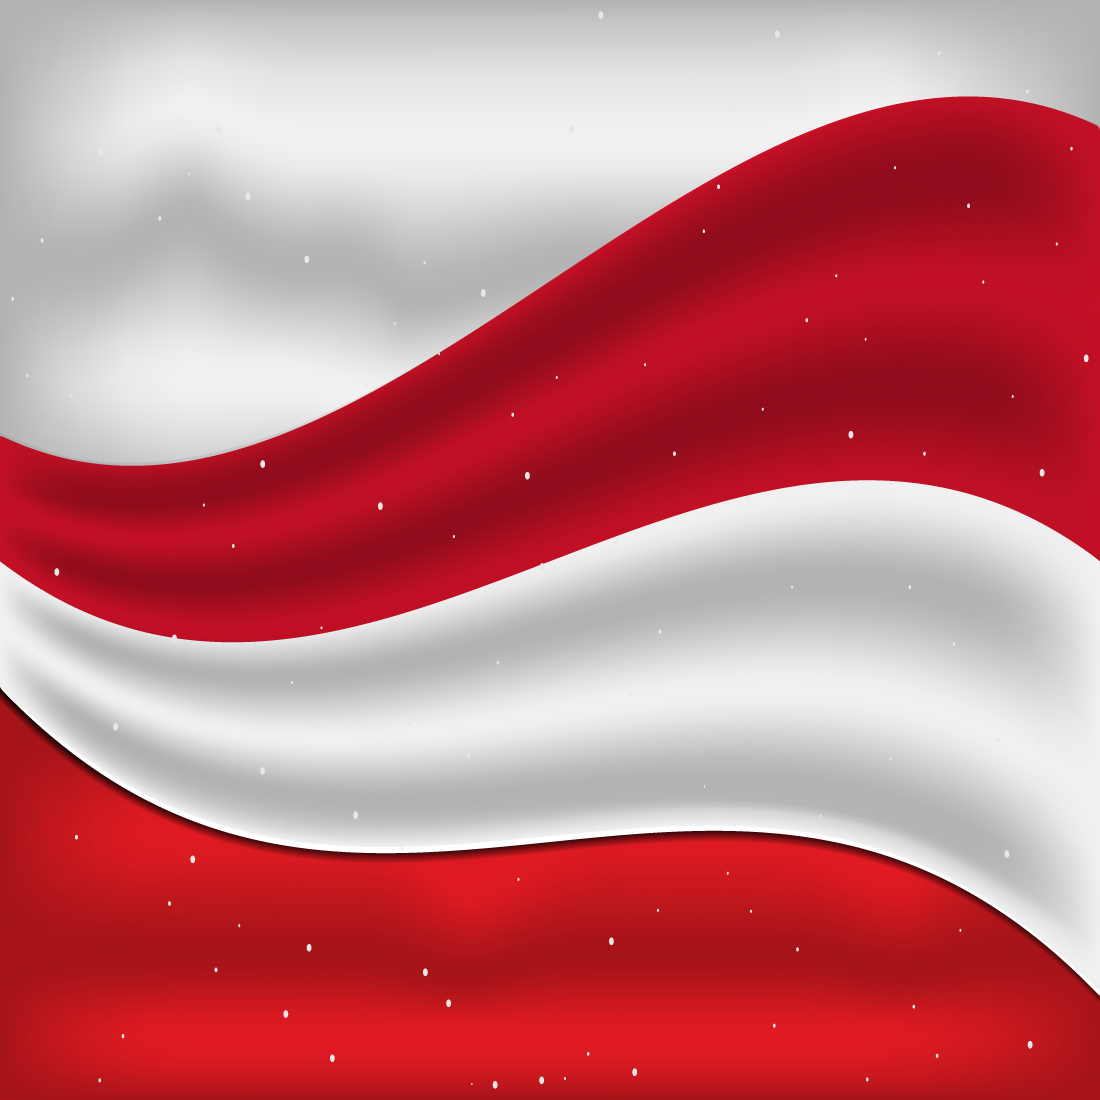 Beautiful image of the flag of Indonesia.